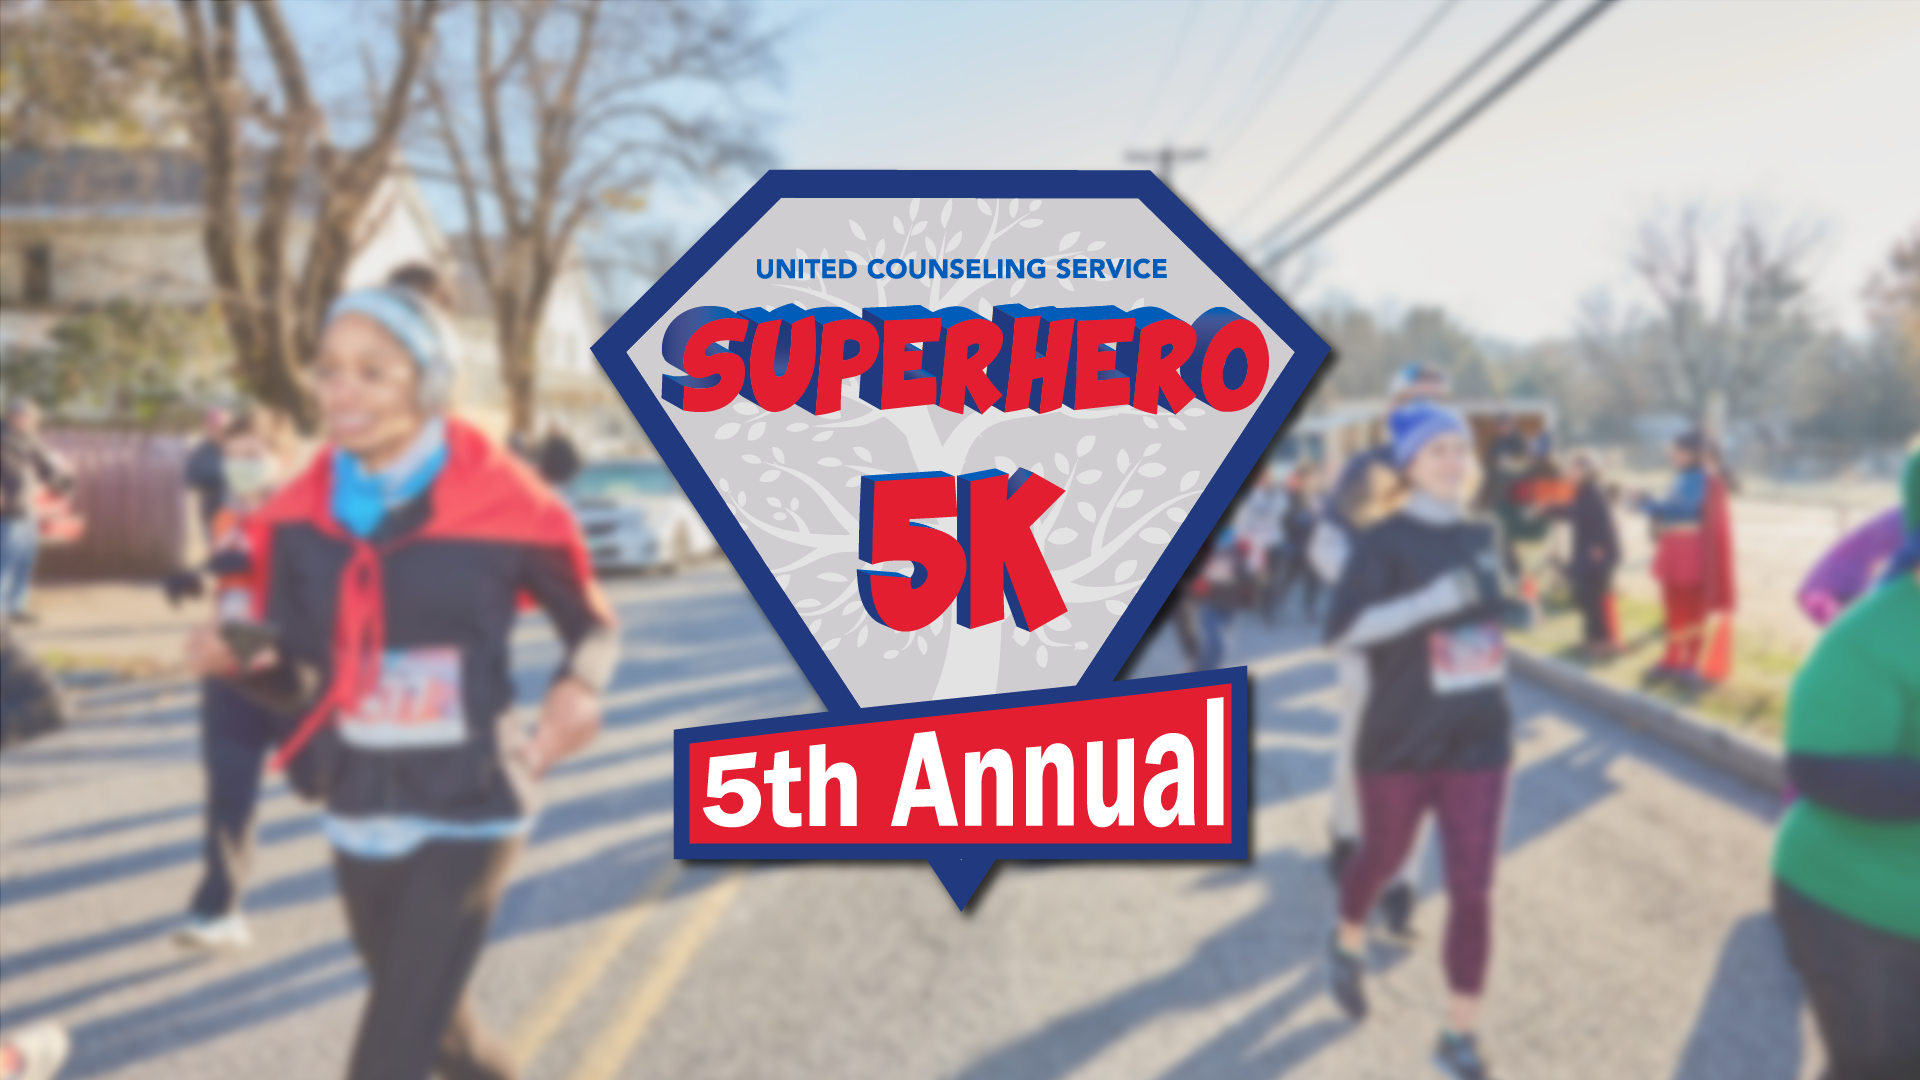 The Superhero 5K logo on top of a blurred picture of a group of people beginning a race wearing superhero outfits.